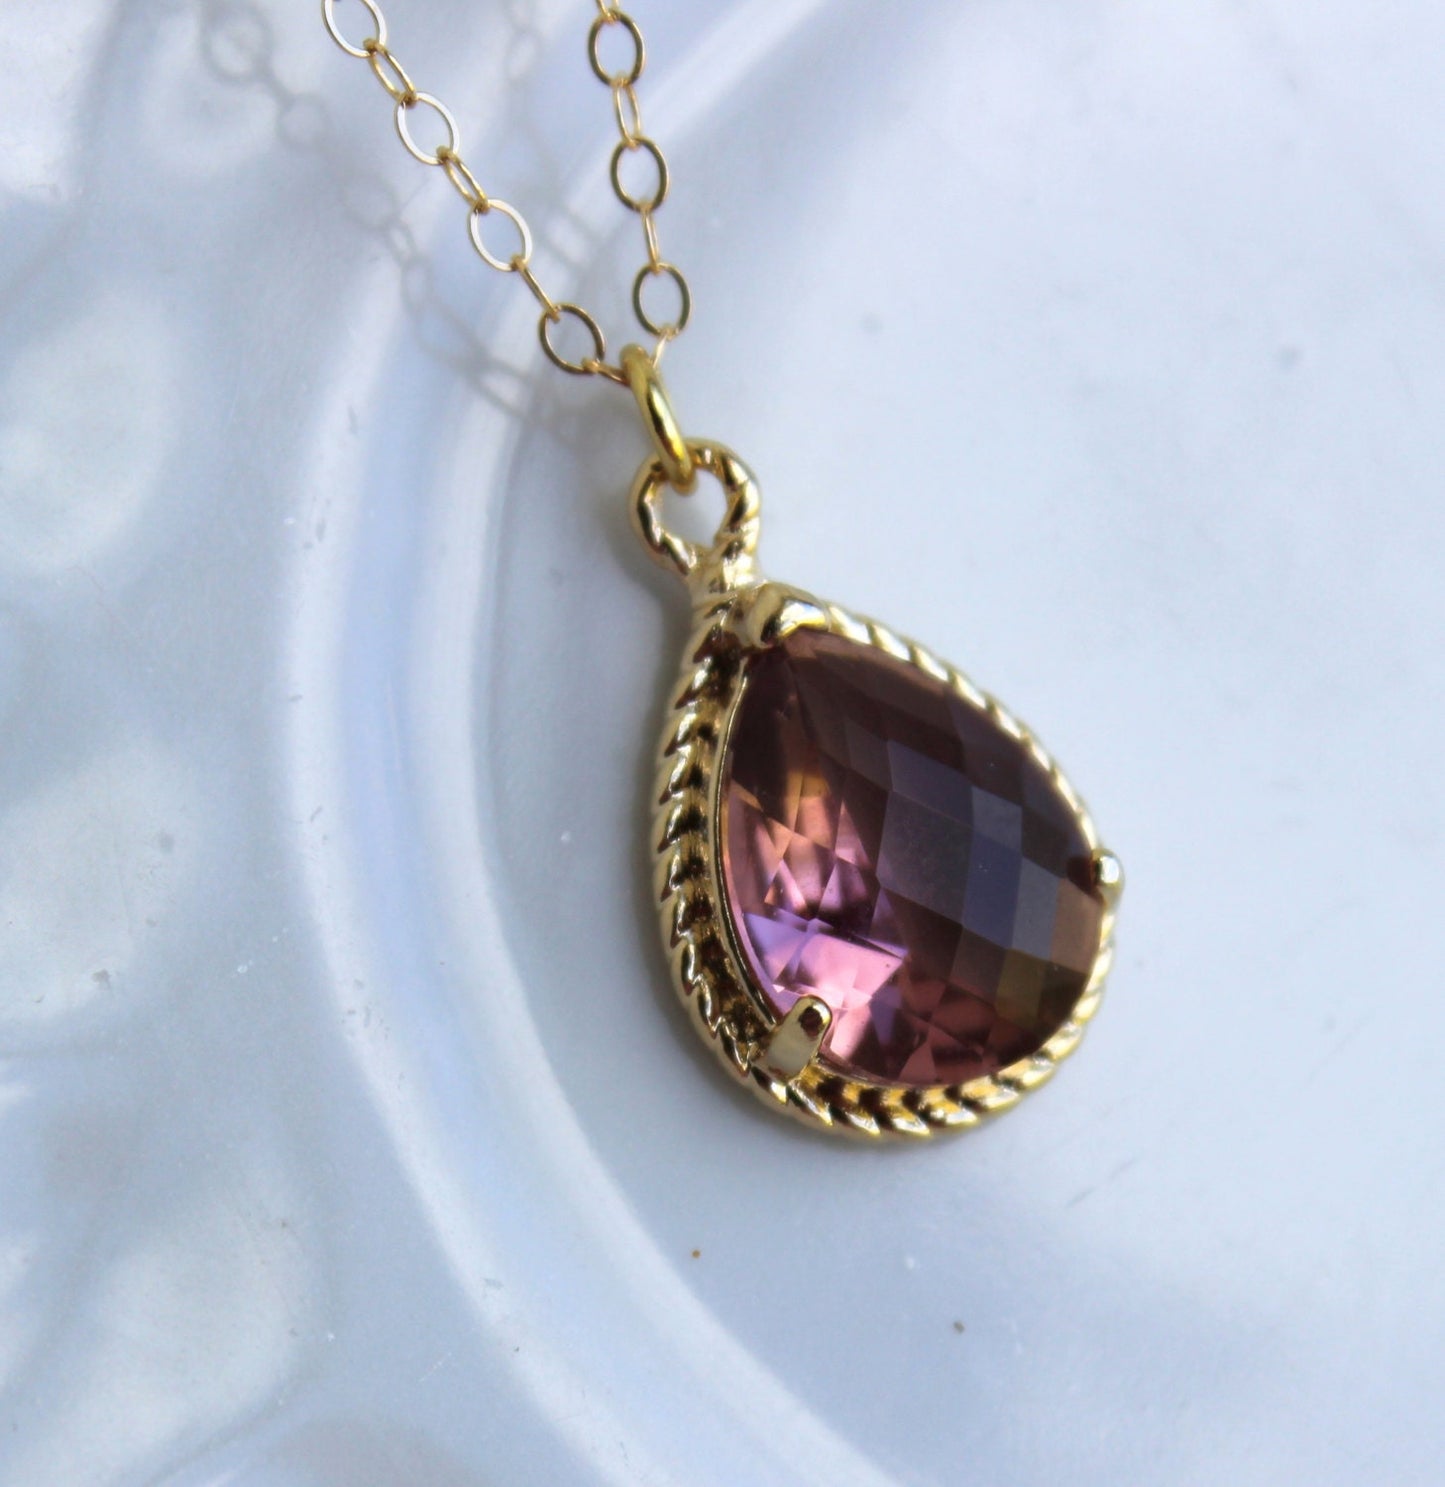 Gold Eggplant Necklace Purple Jewelry - 14k Gold Filled Chain - Eggplant Bridesmaid Jewelry - Plum Wedding Jewelry - Bridesmaid Necklace